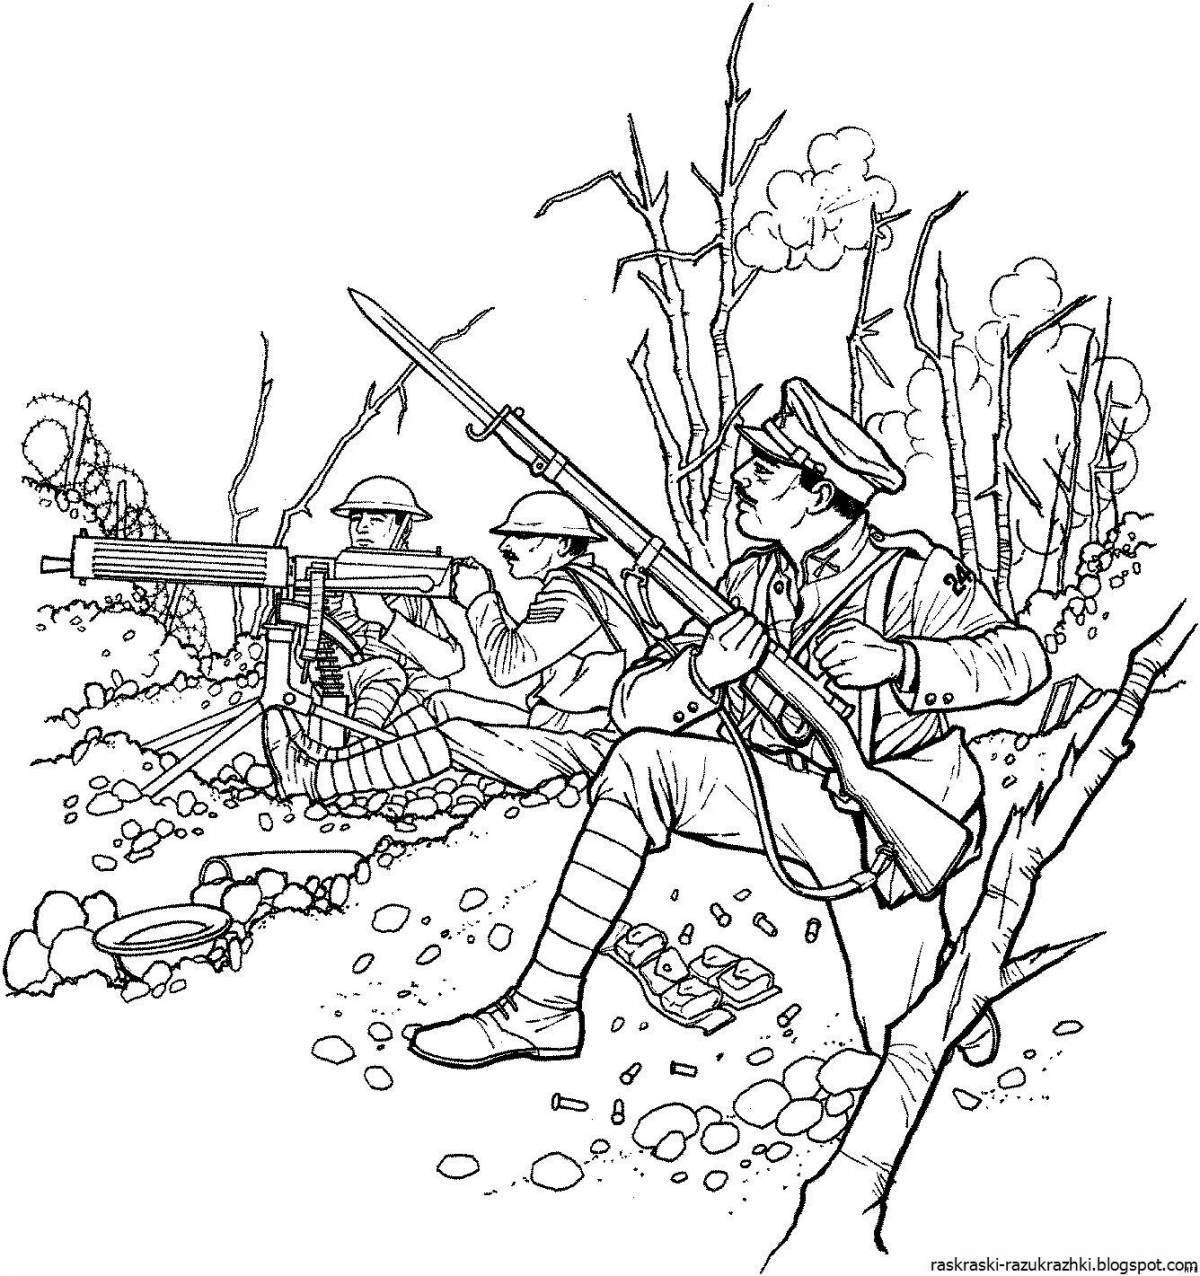 Sinister war coloring page